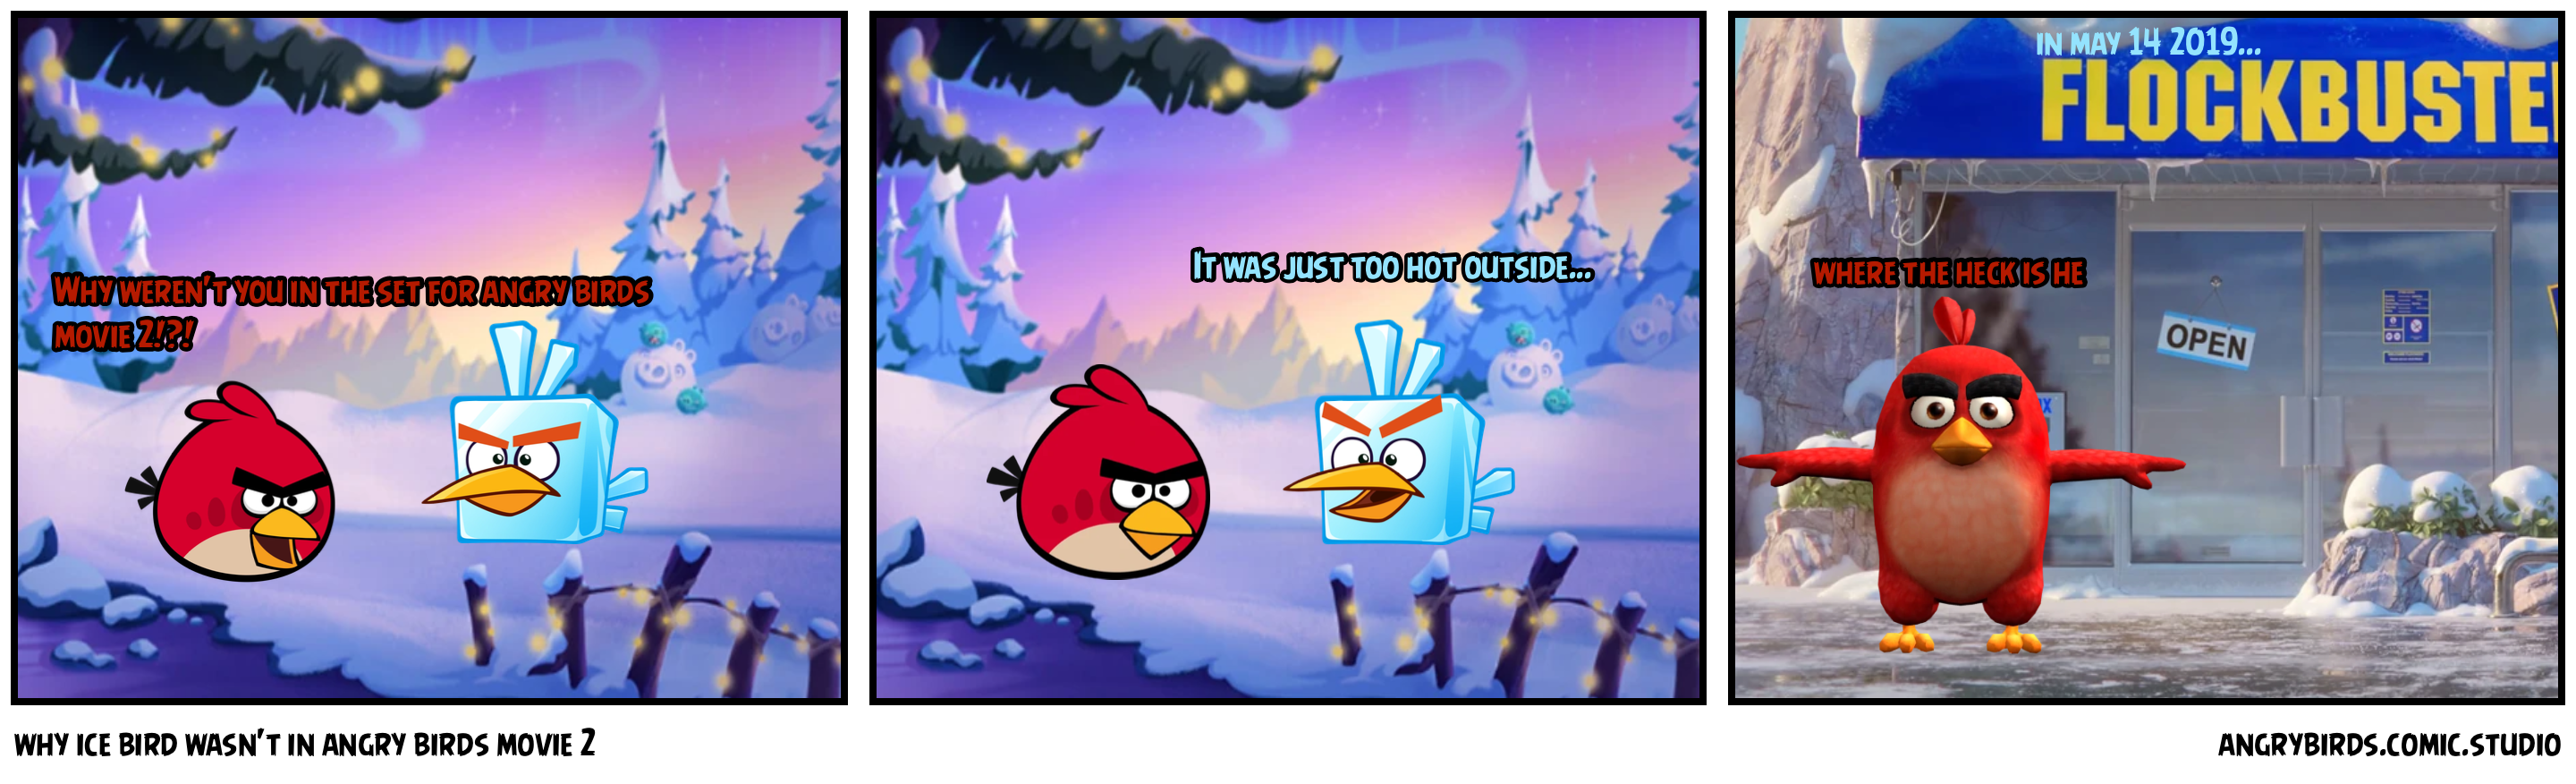 why ice bird wasn't in angry birds movie 2